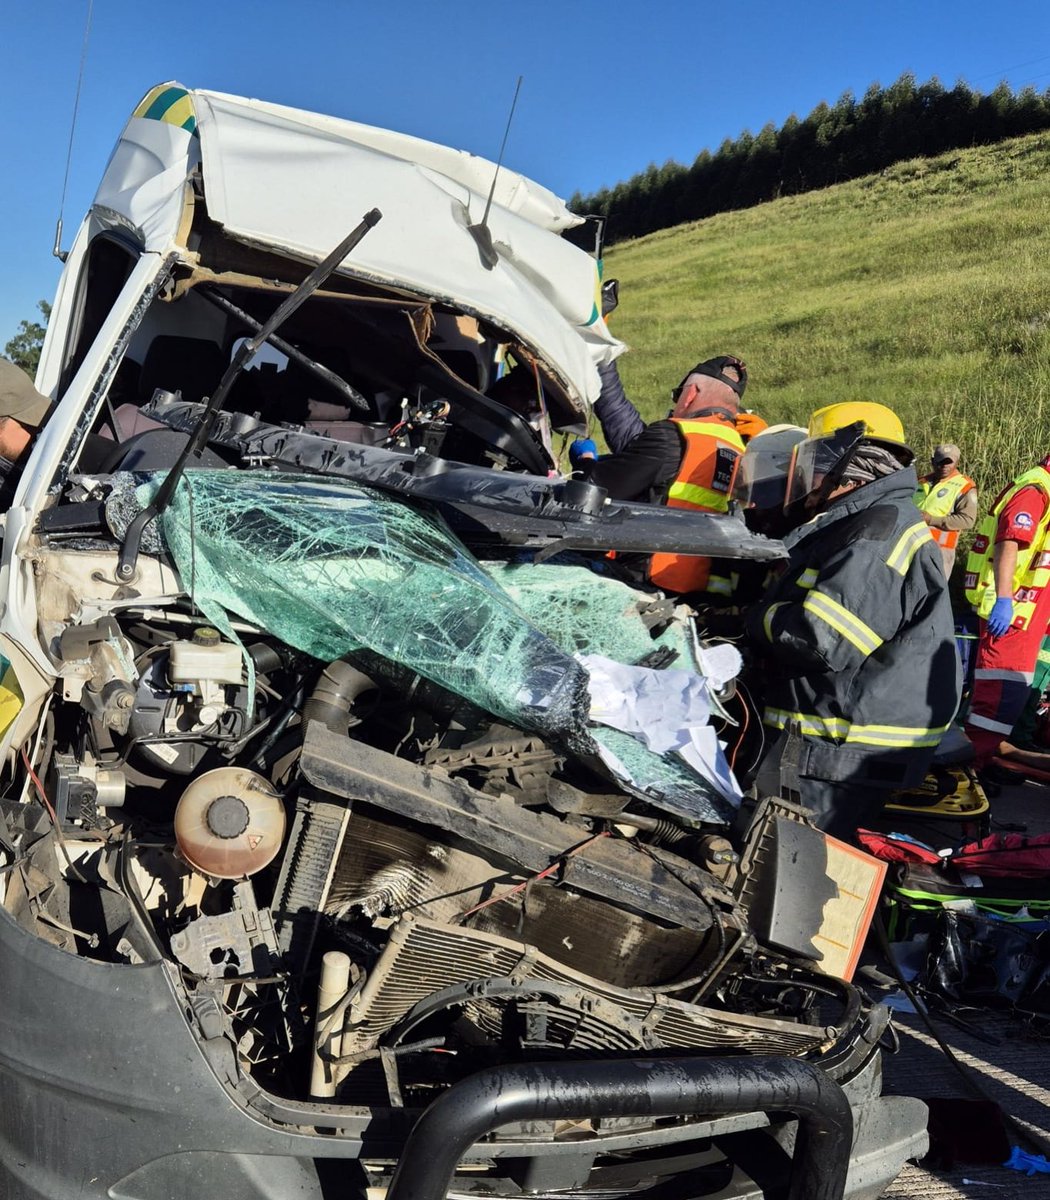 Patient transport ambulance and a truck were involved in a horror crash on the N3 between Cedara and Merrivale buff.ly/3TSHGdb #ArriveAlive @MidlandsEMS